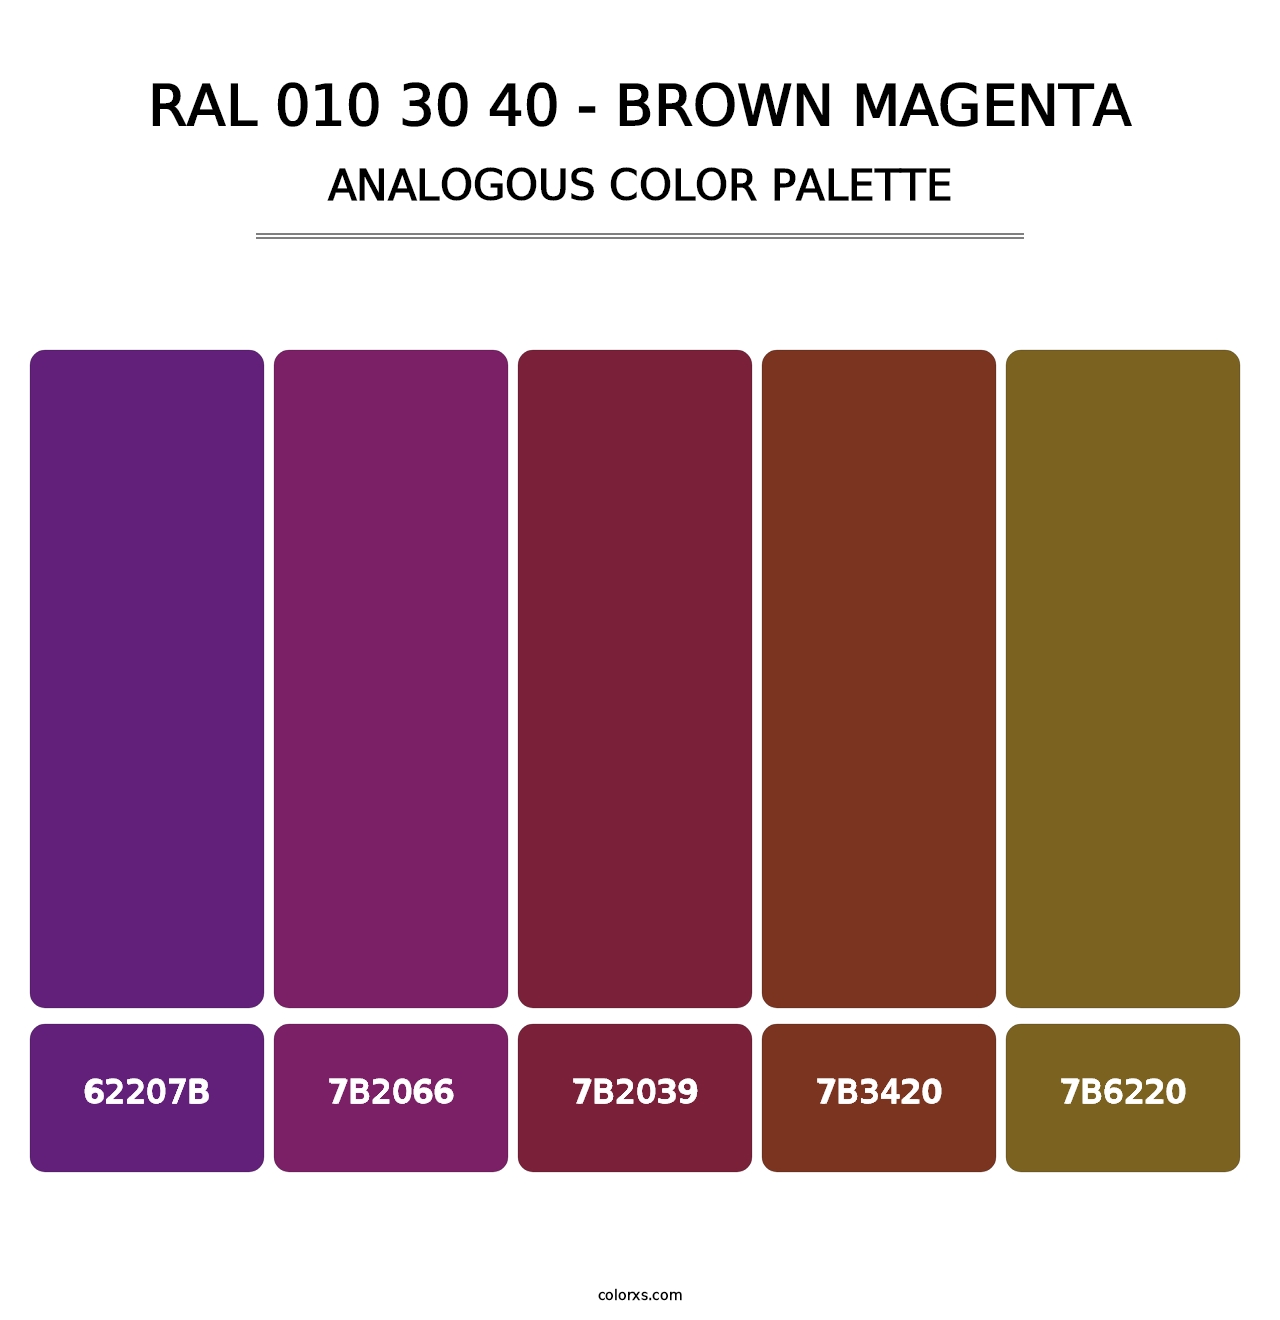 RAL 010 30 40 - Brown Magenta - Analogous Color Palette